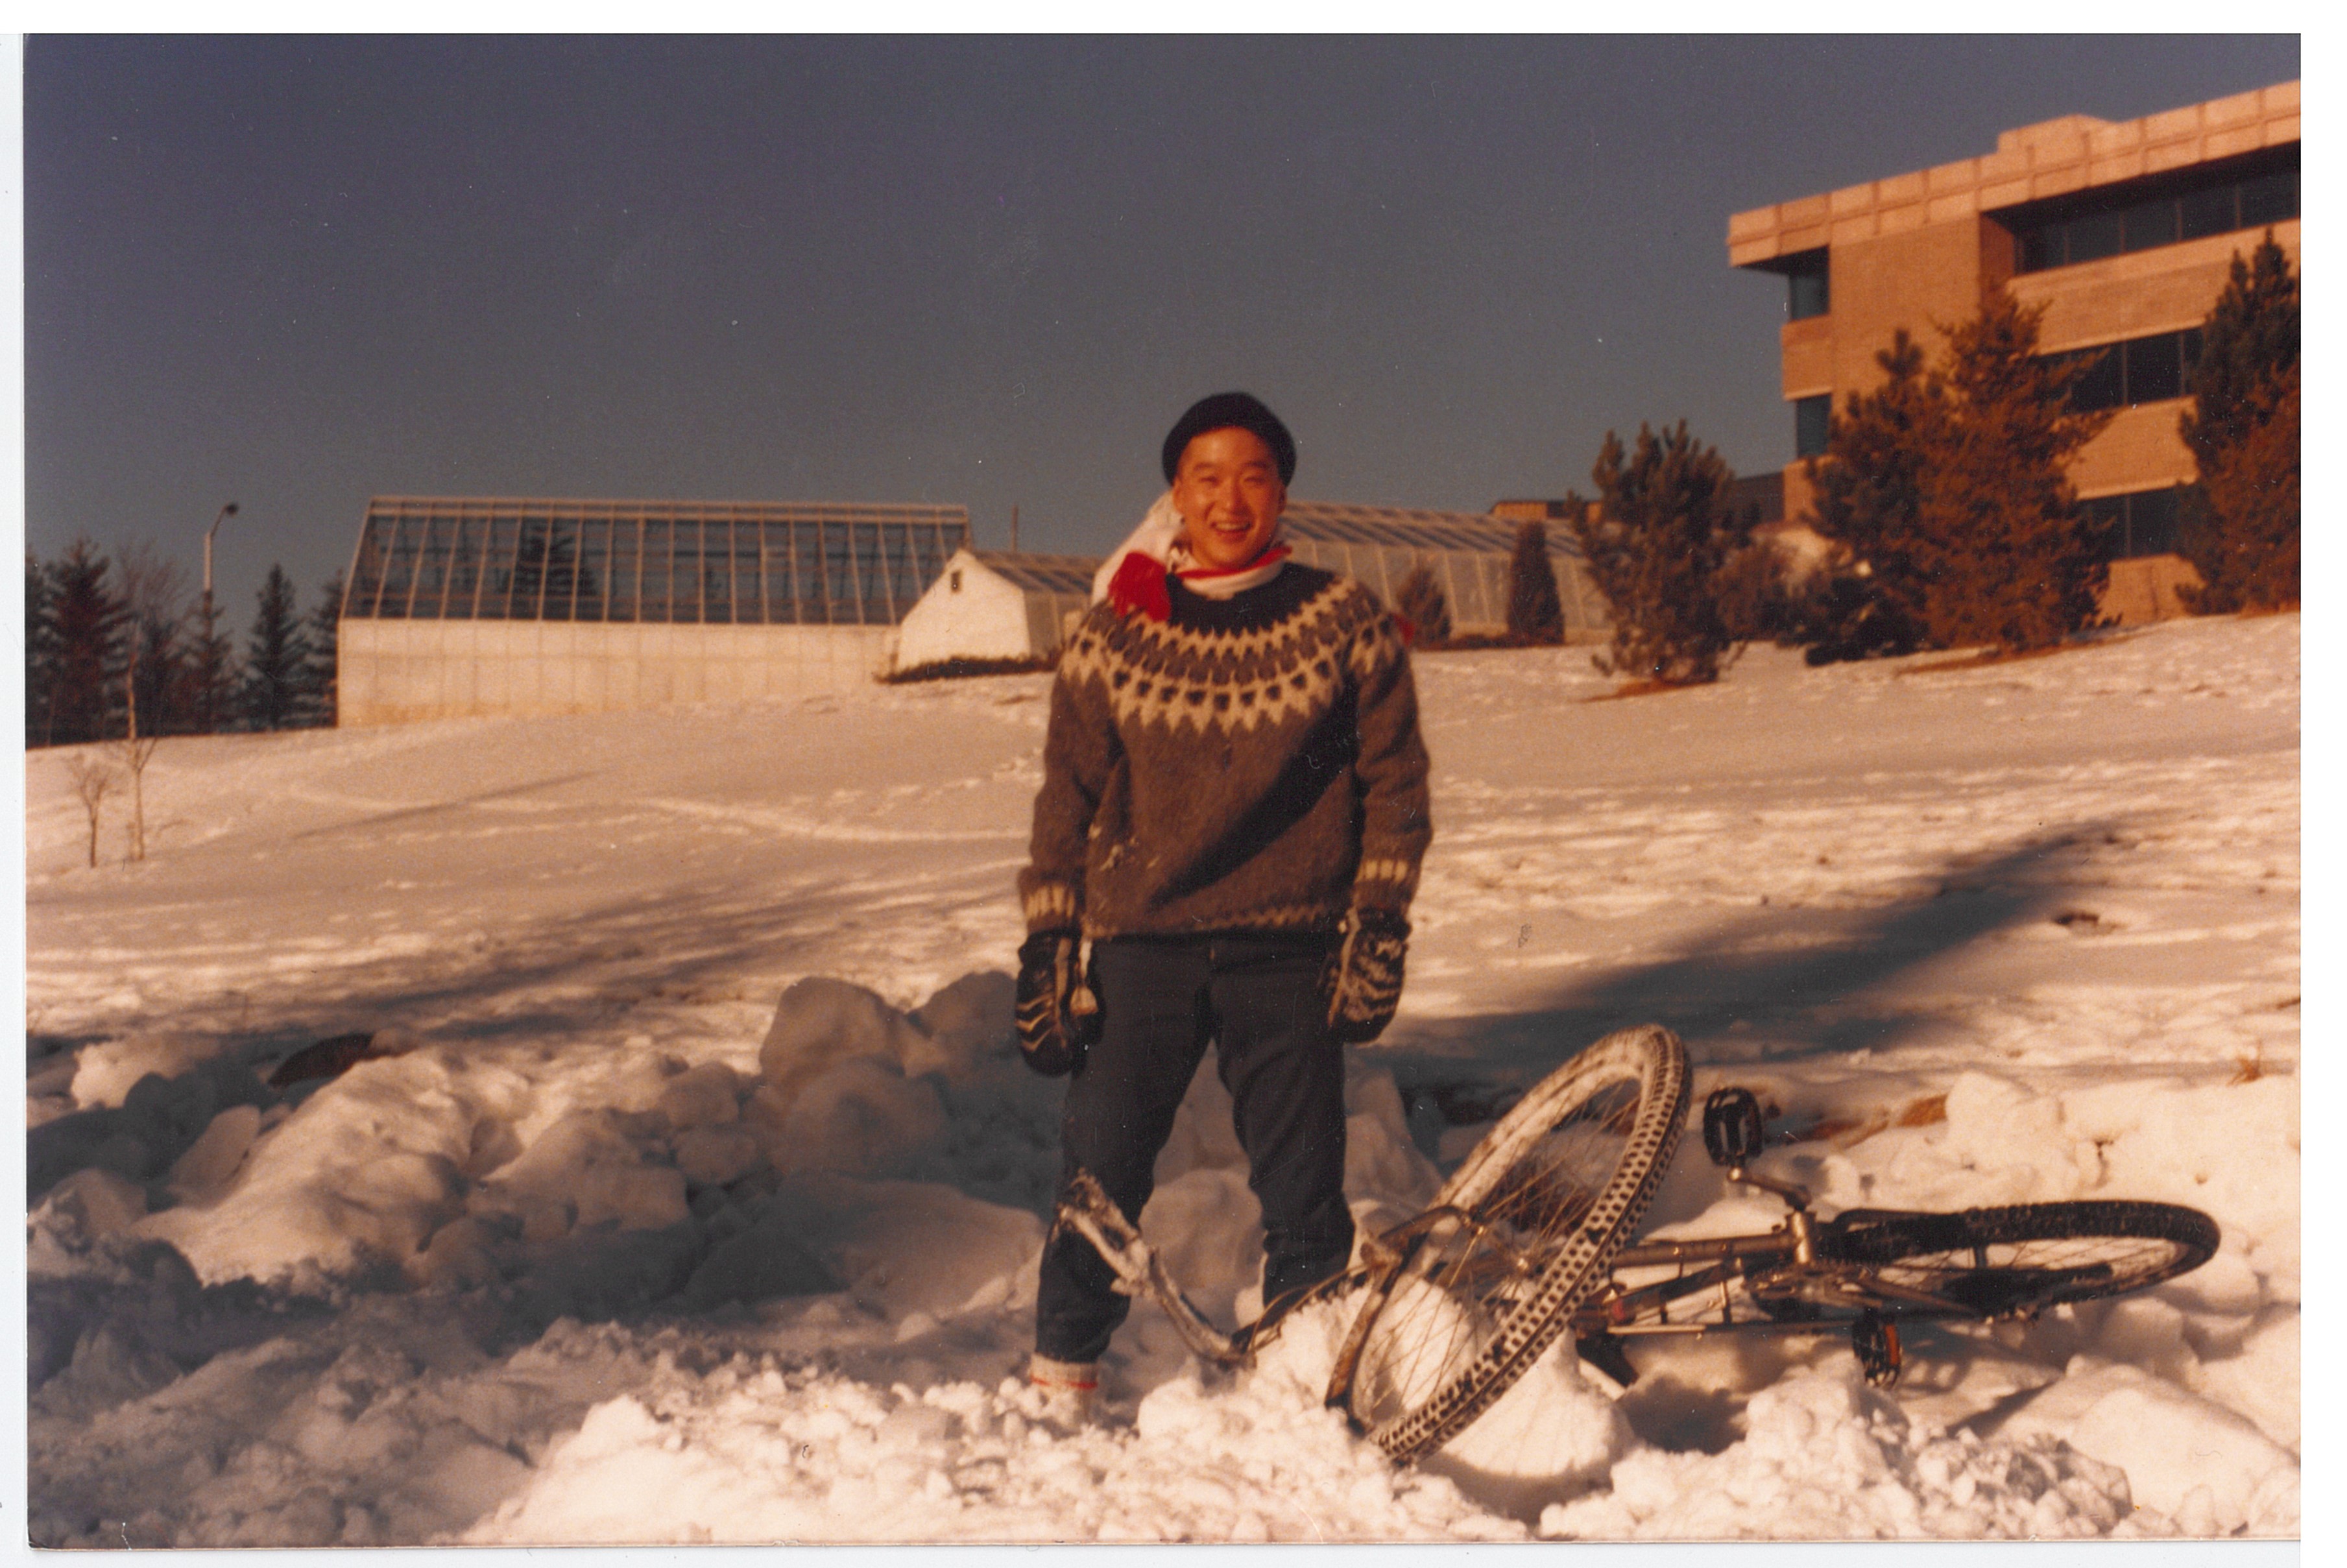 Forestry student Dave Kim wearing a knitted winter cap and sweater stands beside his mountain bike by Lake Tamblyn in 1986